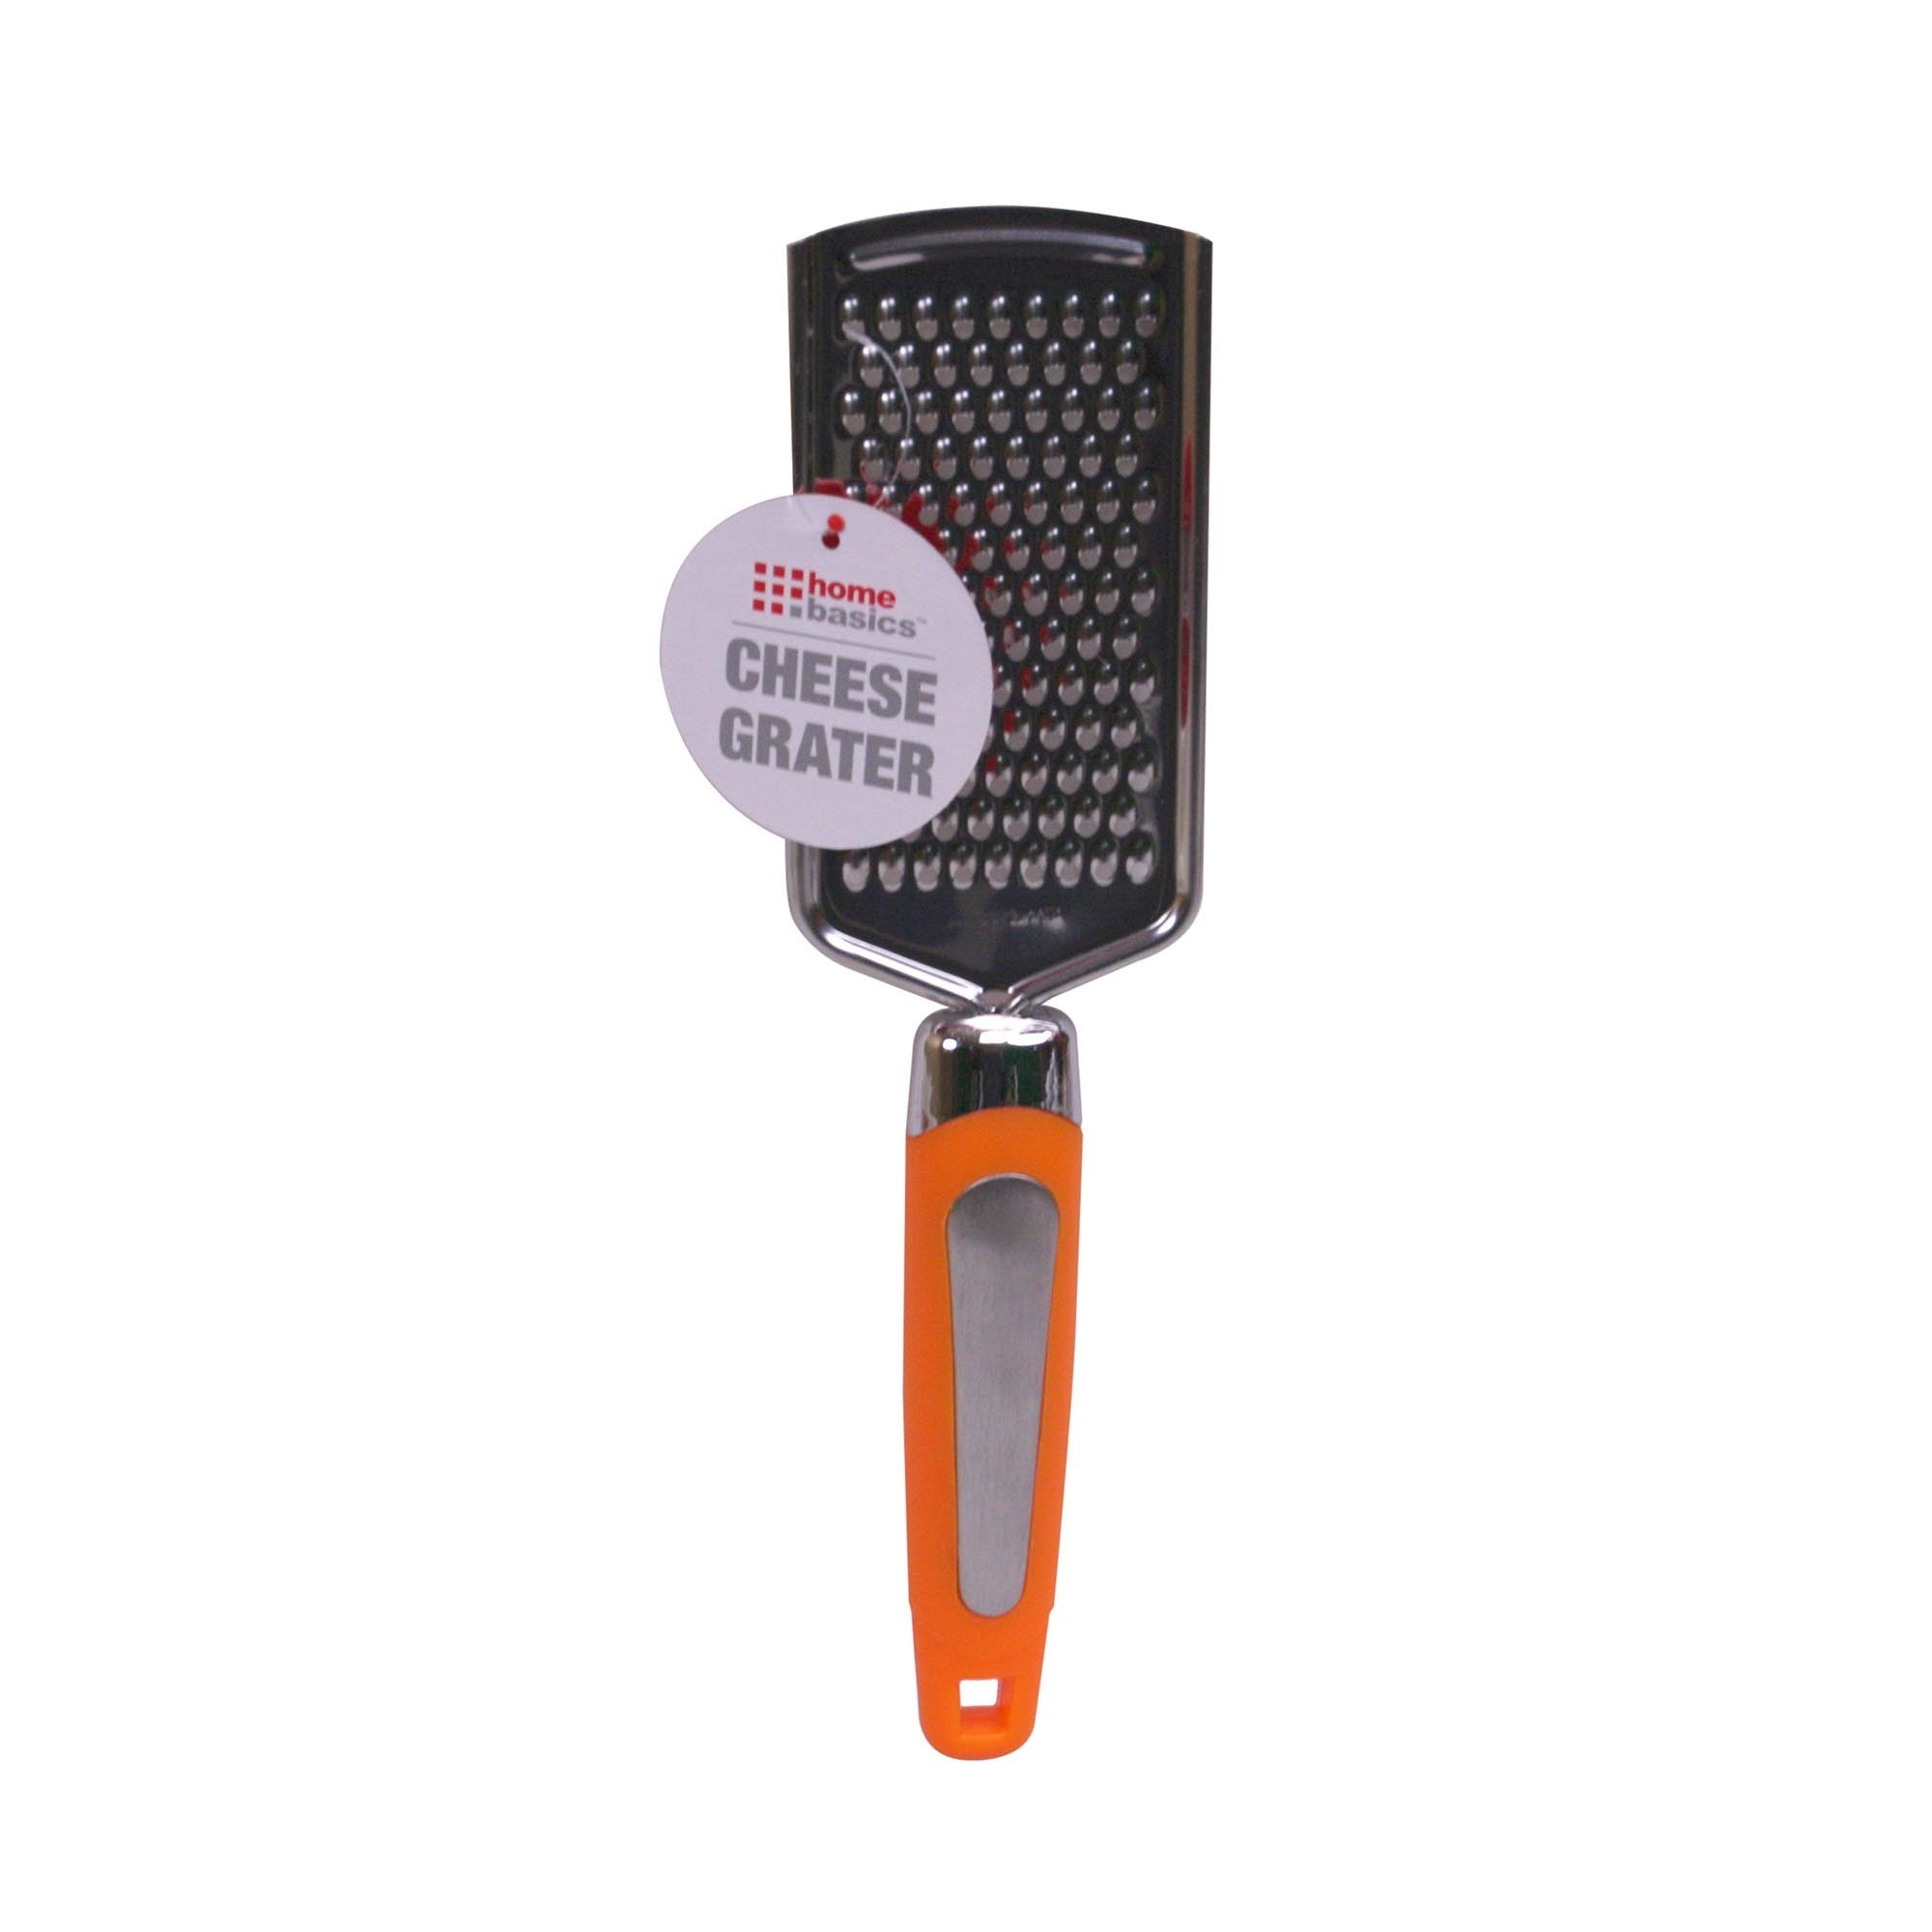 Home Basis Silicone Cheese Grater - Assorted Colors